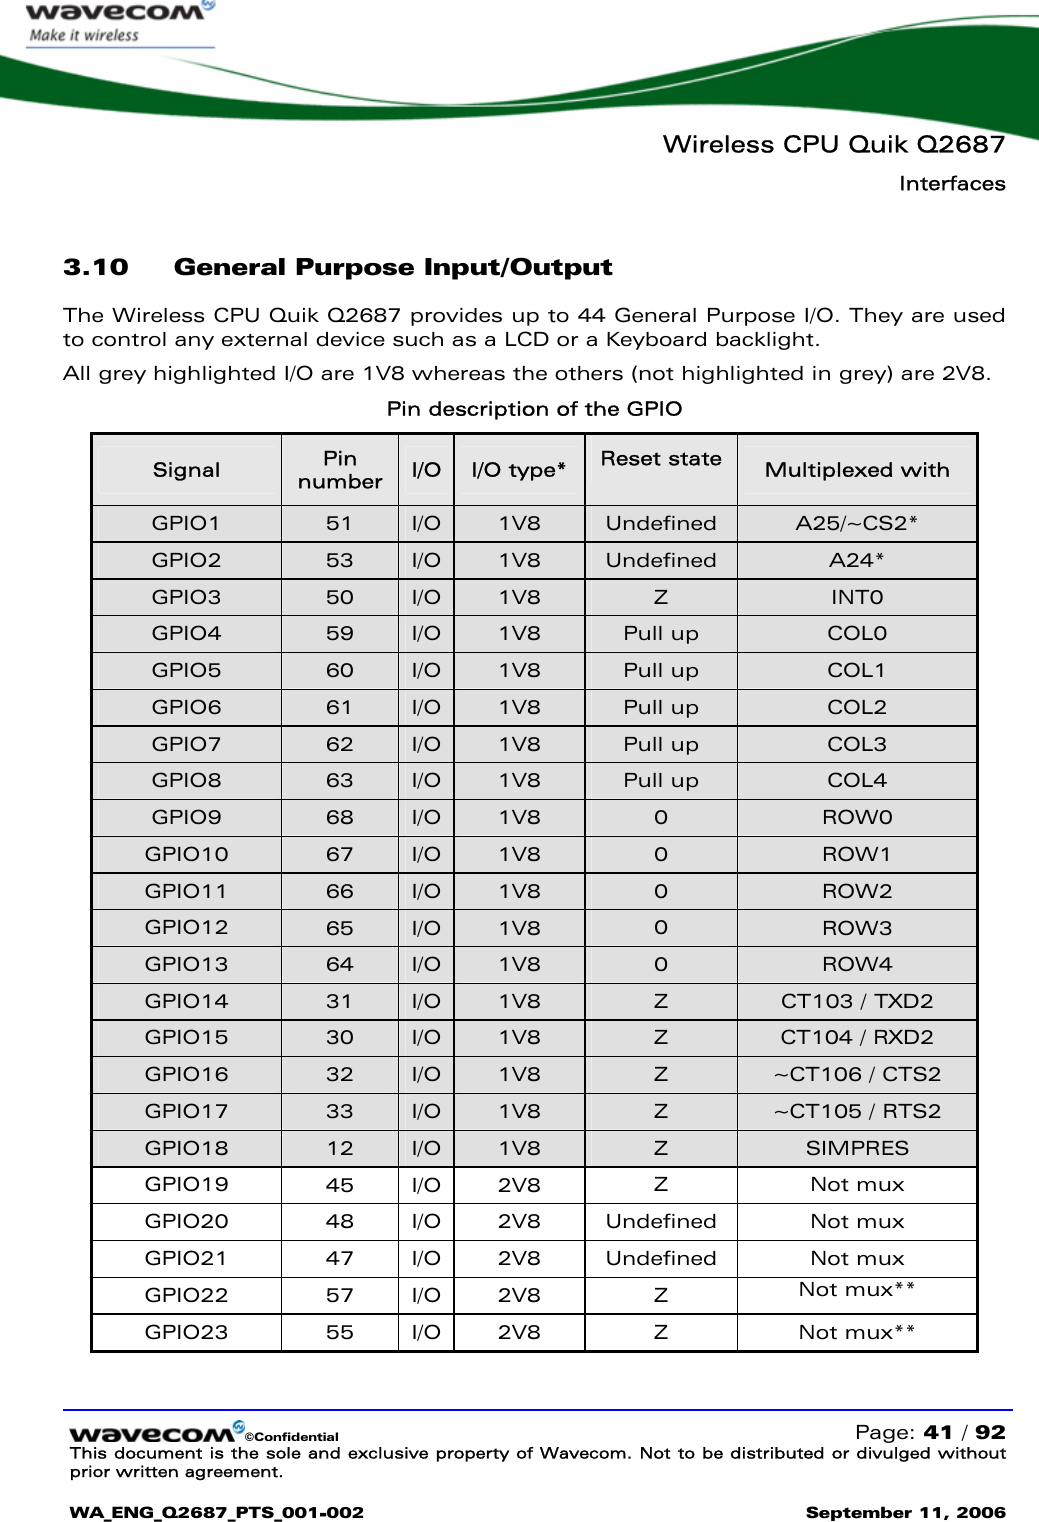   Wireless CPU Quik Q2687 Interfaces   ©Confidential   Page: 41 / 92 This document is the sole and exclusive property of Wavecom. Not to be distributed or divulged without prior written agreement.  WA_ENG_Q2687_PTS_001-002 September 11, 2006   3.10 General Purpose Input/Output The Wireless CPU Quik Q2687 provides up to 44 General Purpose I/O. They are used to control any external device such as a LCD or a Keyboard backlight.  All grey highlighted I/O are 1V8 whereas the others (not highlighted in grey) are 2V8. Pin description of the GPIO Signal  Pin number  I/O  I/O type*  Reset state  Multiplexed with GPIO1  51  I/O  1V8  Undefined  A25/~CS2* GPIO2  53  I/O  1V8  Undefined  A24* GPIO3  50  I/O  1V8  Z  INT0 GPIO4  59  I/O  1V8  Pull up  COL0 GPIO5  60  I/O  1V8  Pull up  COL1 GPIO6  61  I/O  1V8  Pull up  COL2 GPIO7  62  I/O  1V8  Pull up  COL3 GPIO8  63  I/O  1V8  Pull up  COL4 GPIO9  68  I/O  1V8  0  ROW0 GPIO10  67  I/O  1V8  0  ROW1 GPIO11  66  I/O  1V8  0  ROW2 GPIO12  65  I/O  1V8  0  ROW3 GPIO13  64  I/O  1V8  0  ROW4 GPIO14  31  I/O  1V8  Z  CT103 / TXD2 GPIO15  30  I/O  1V8  Z  CT104 / RXD2 GPIO16  32  I/O  1V8  Z  ~CT106 / CTS2 GPIO17  33  I/O  1V8  Z  ~CT105 / RTS2  GPIO18  12  I/O  1V8  Z  SIMPRES  GPIO19  45 I/O 2V8  Z Not mux GPIO20  48 I/O 2V8  Undefined  Not mux GPIO21  47 I/O 2V8  Undefined  Not mux GPIO22  57 I/O 2V8  Z  Not mux** GPIO23  55 I/O 2V8  Z Not mux** 